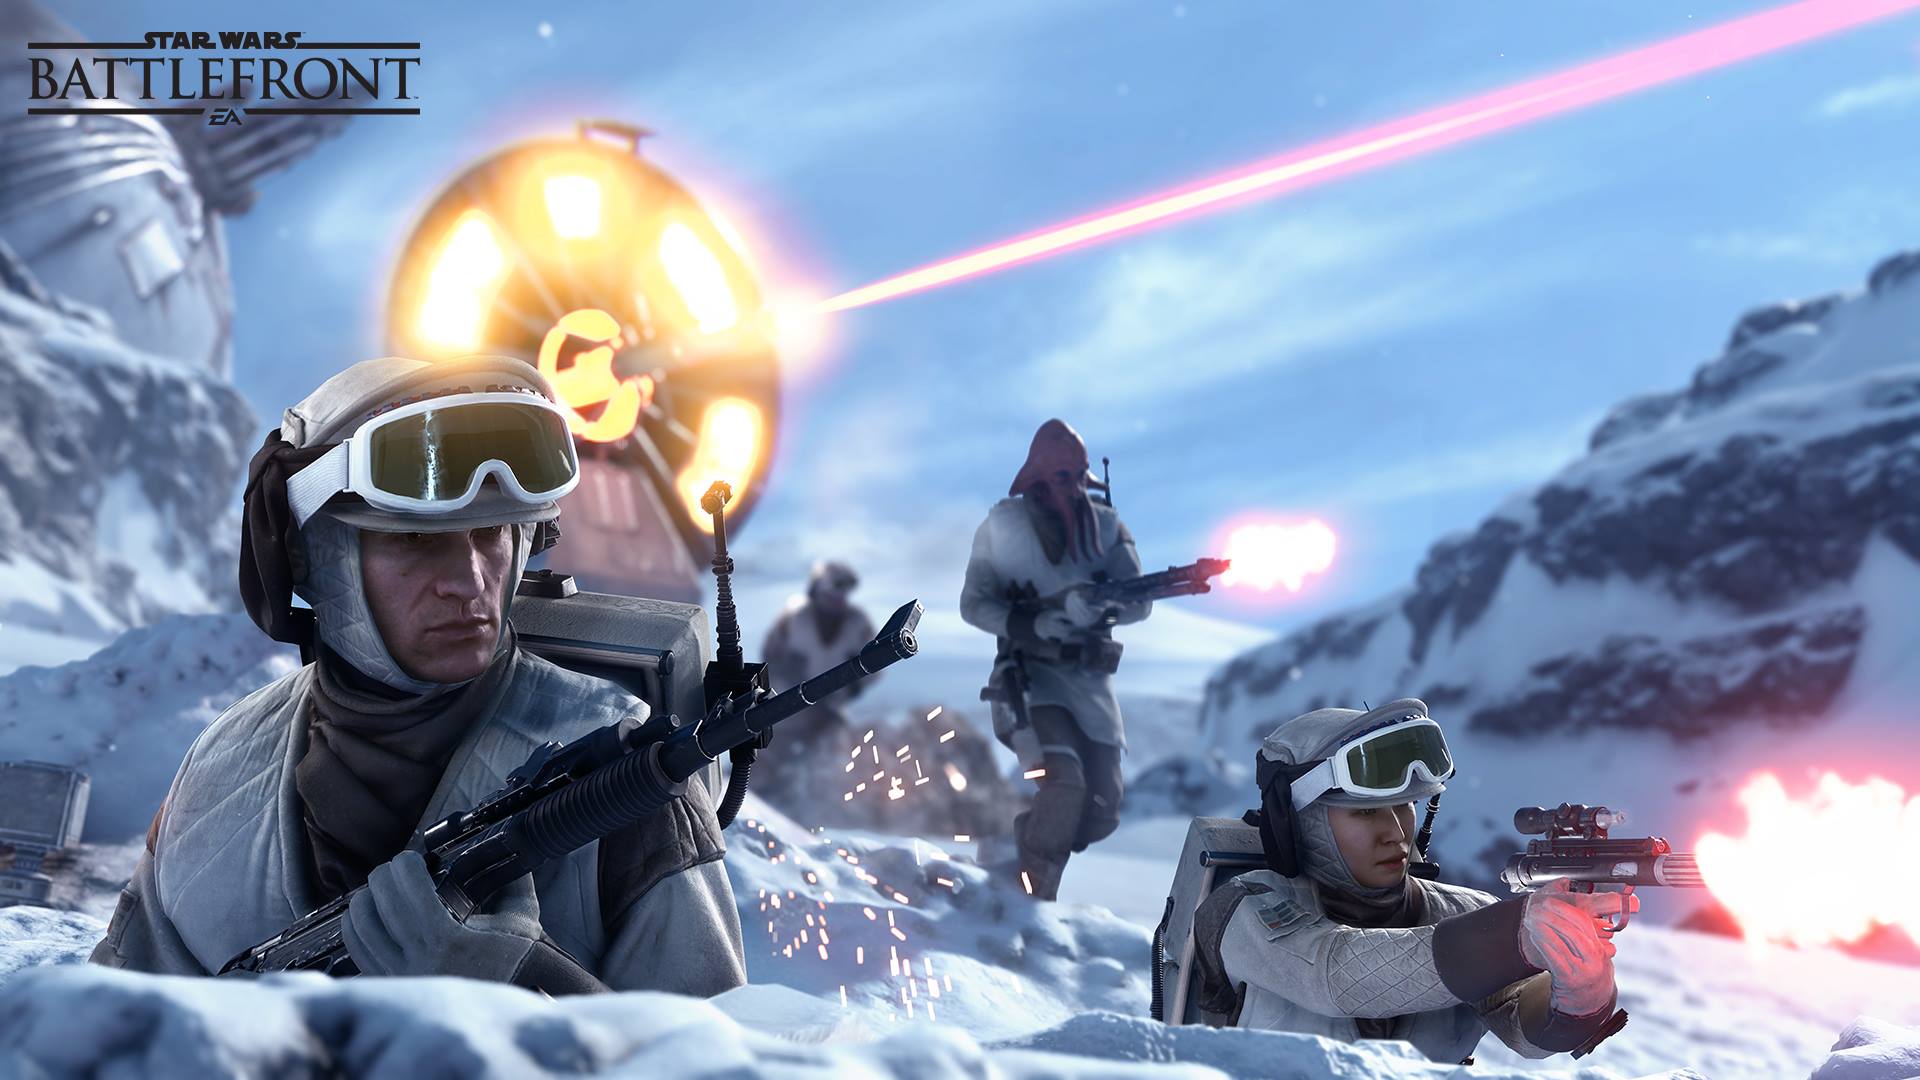 Awesome Star Wars Battlefront Wallpaper. Full HD Picture